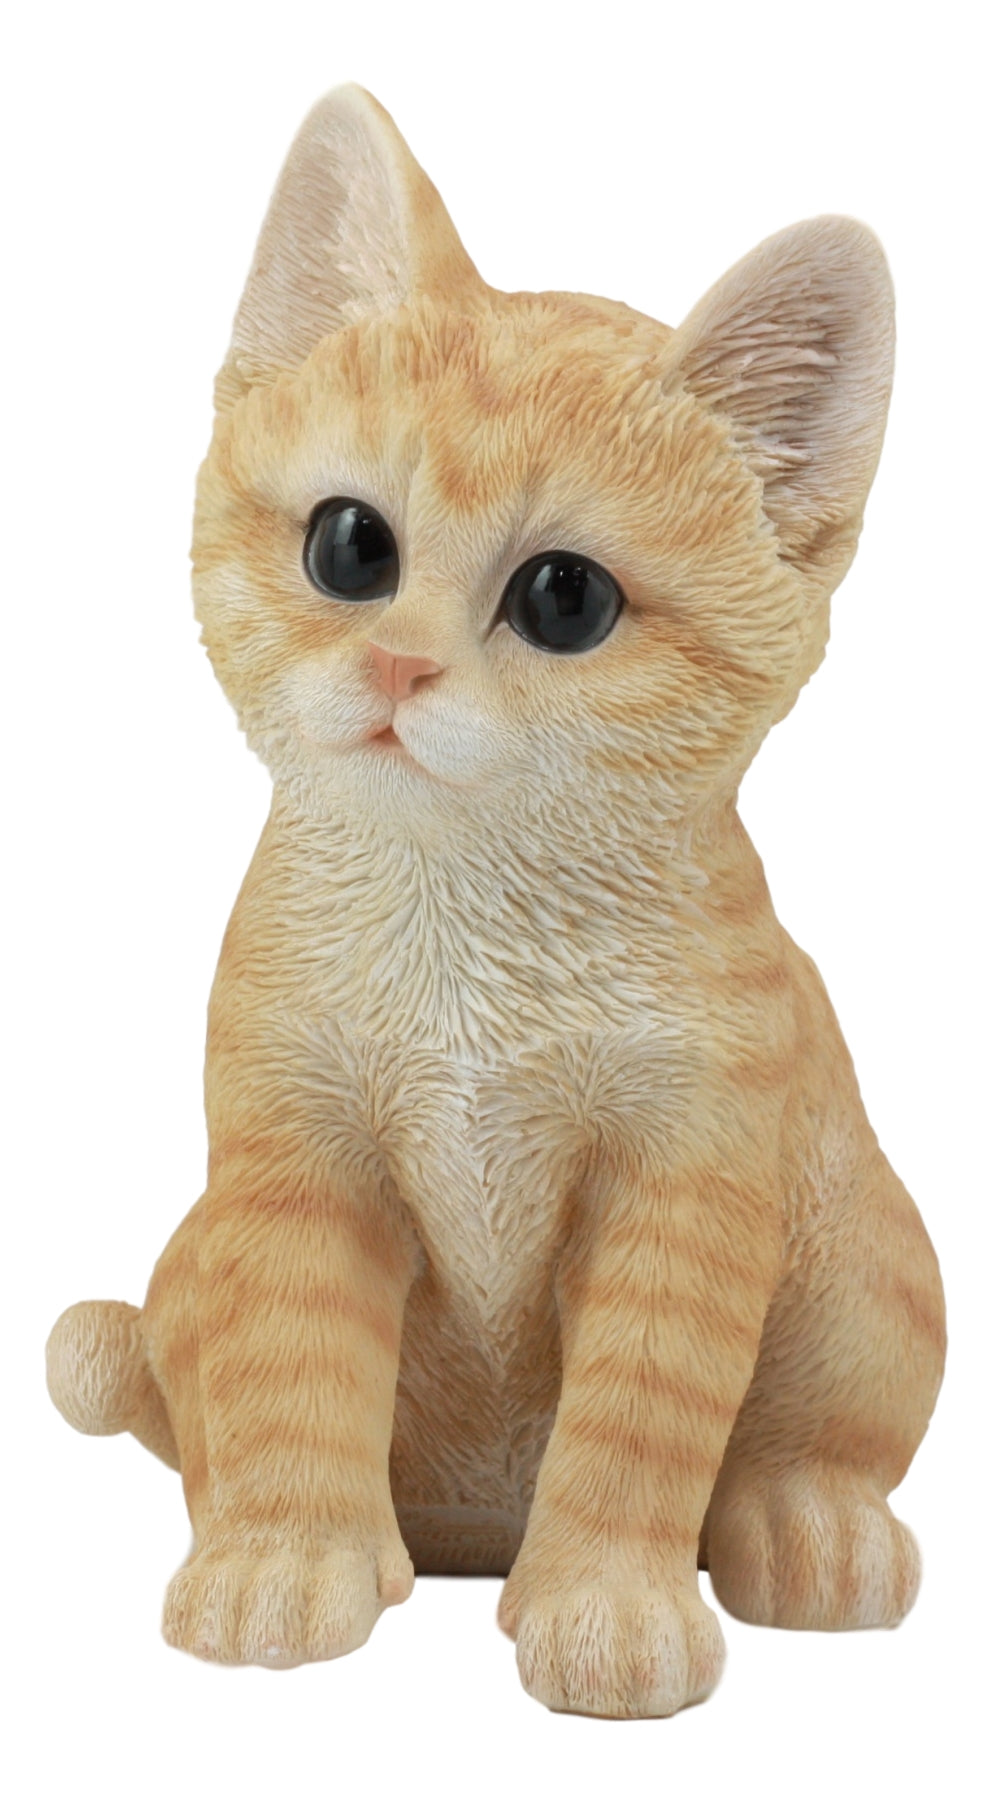 Ebros Adorable Playful Crouching Feline Orange Tabby Cat Kitten Figurine  with Realistic Glass Eyes Pet Pal Kittens Cats Collectible Figurine for